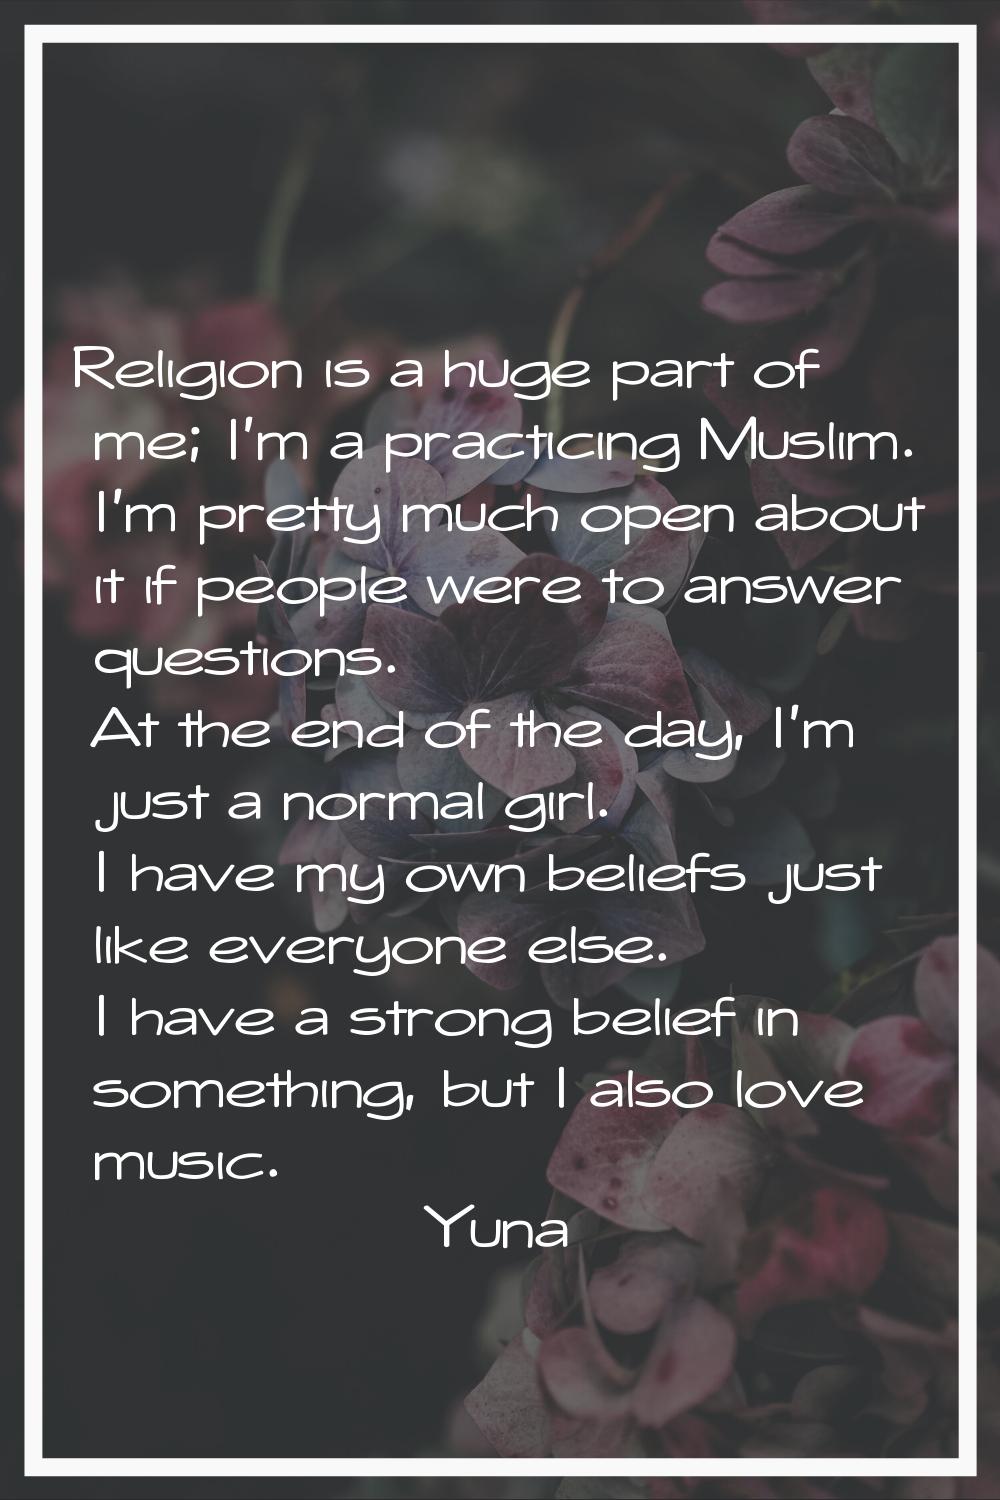 Religion is a huge part of me; I'm a practicing Muslim. I'm pretty much open about it if people wer